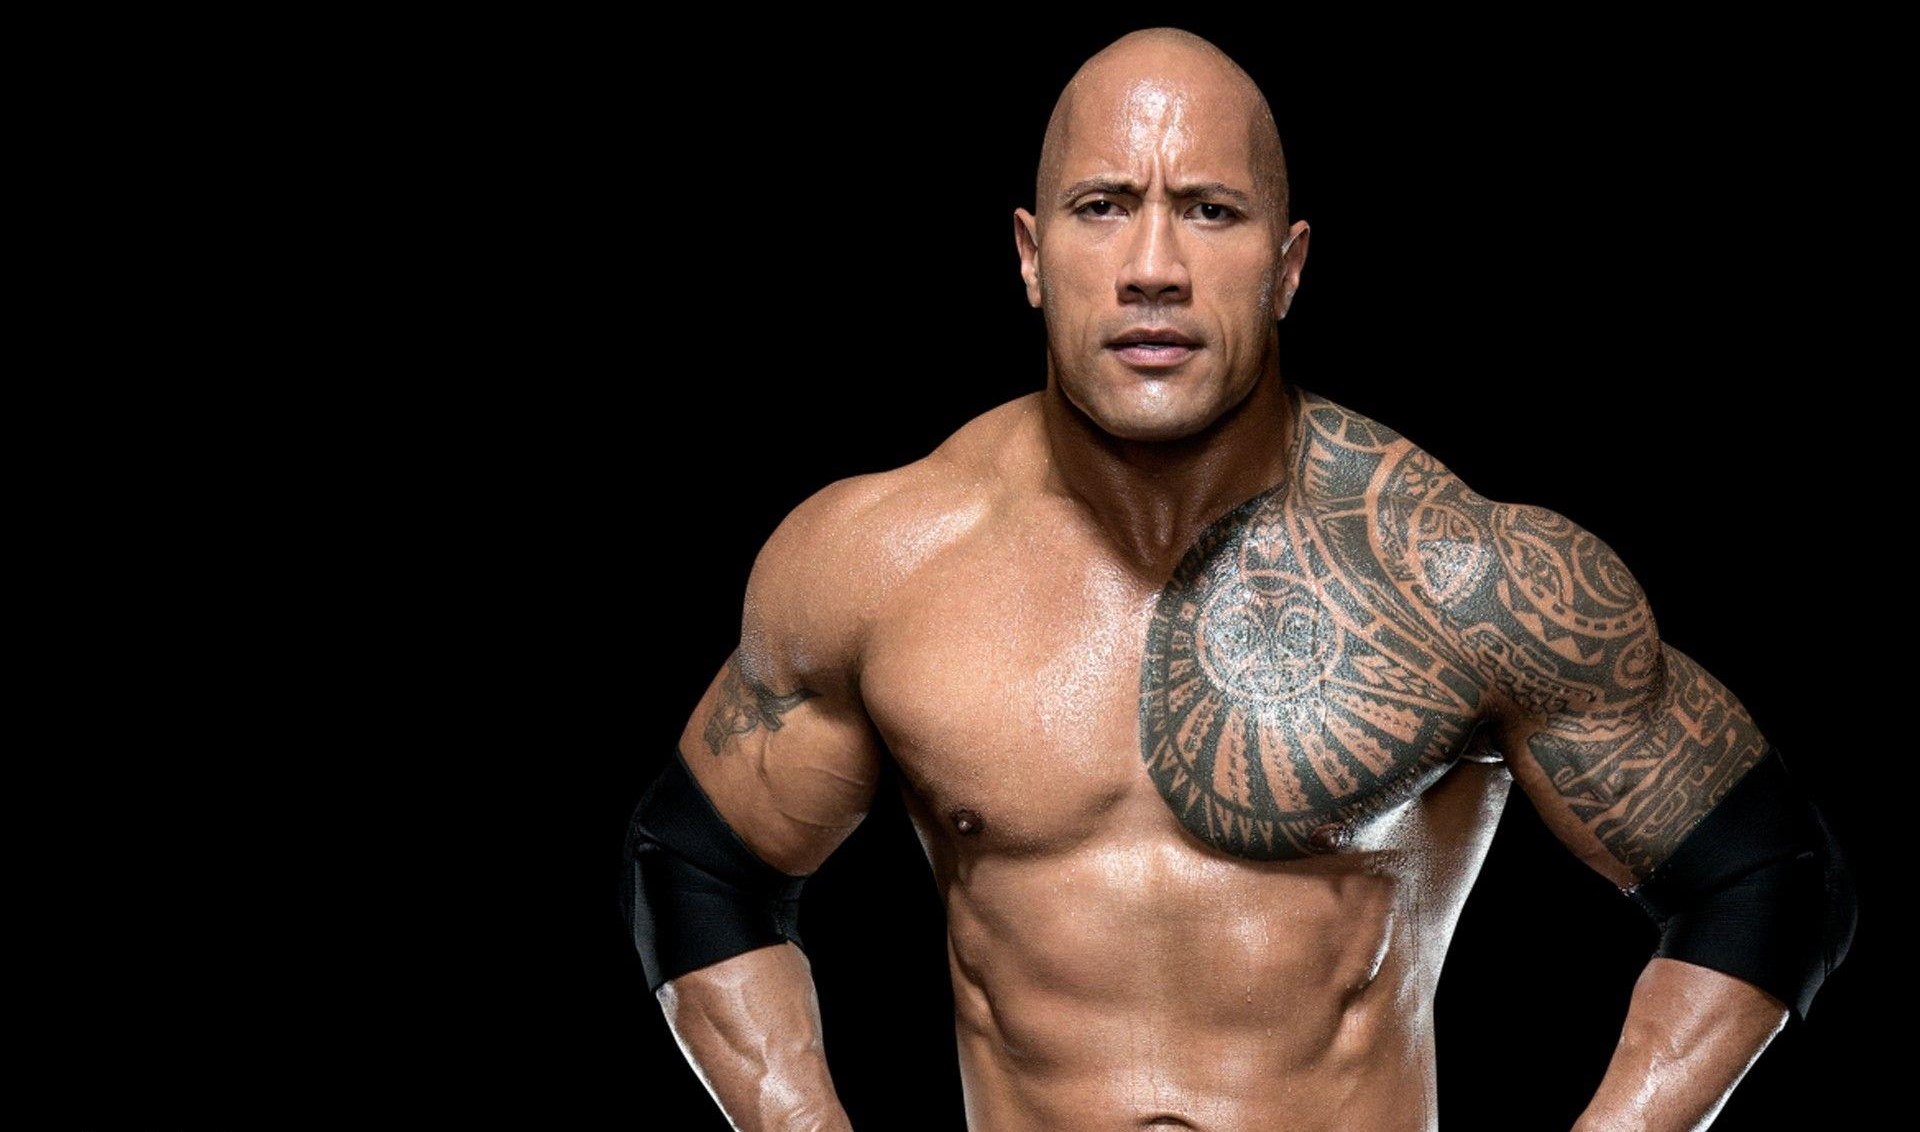 The Rock Biography Age, Height, Facts, Achievements, Facts & Net Worth